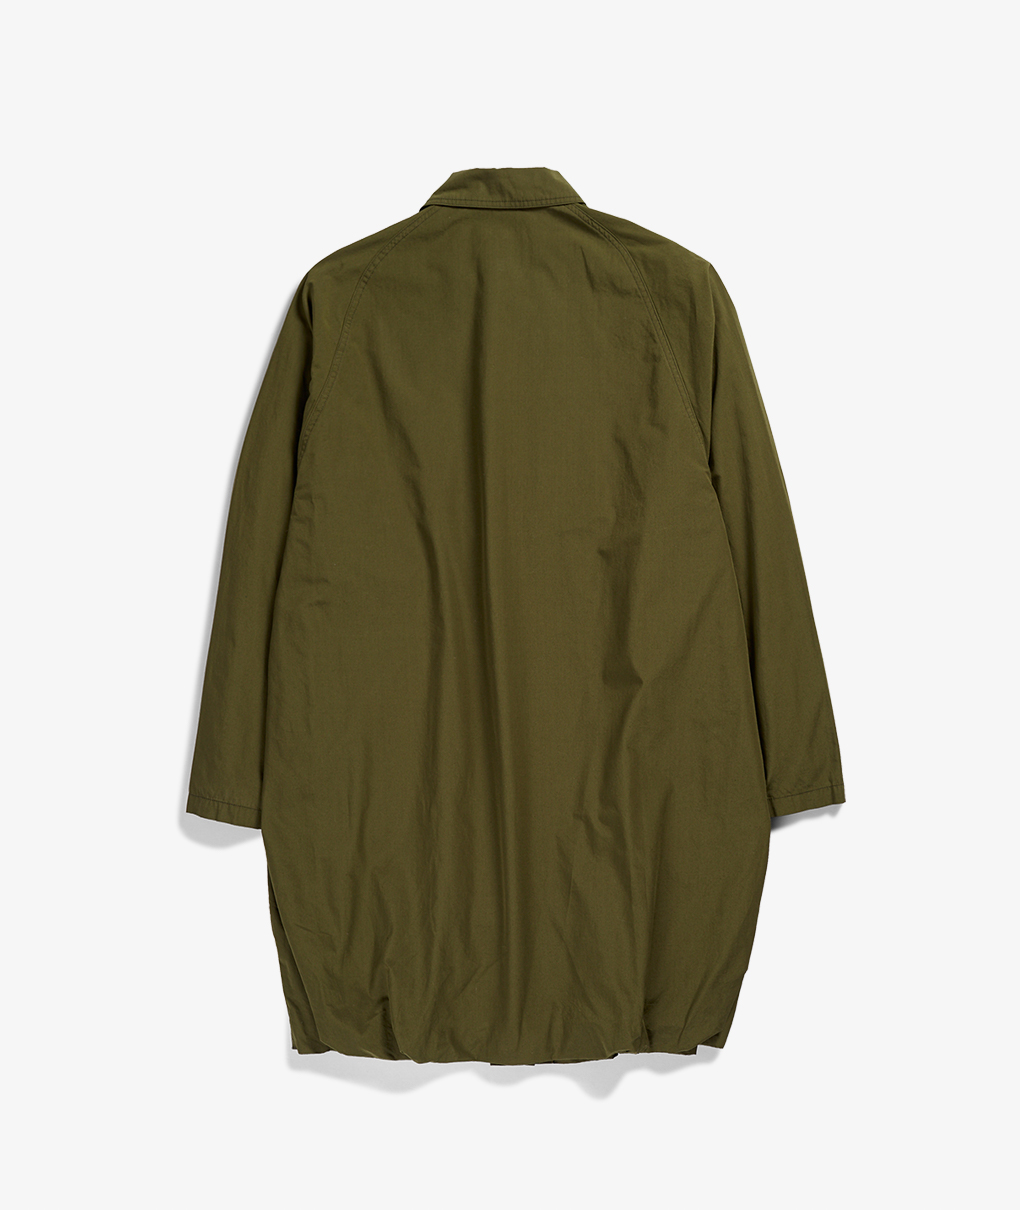 Norse Store | Shipping Worldwide - Visvim Four Winds Coat - Olive